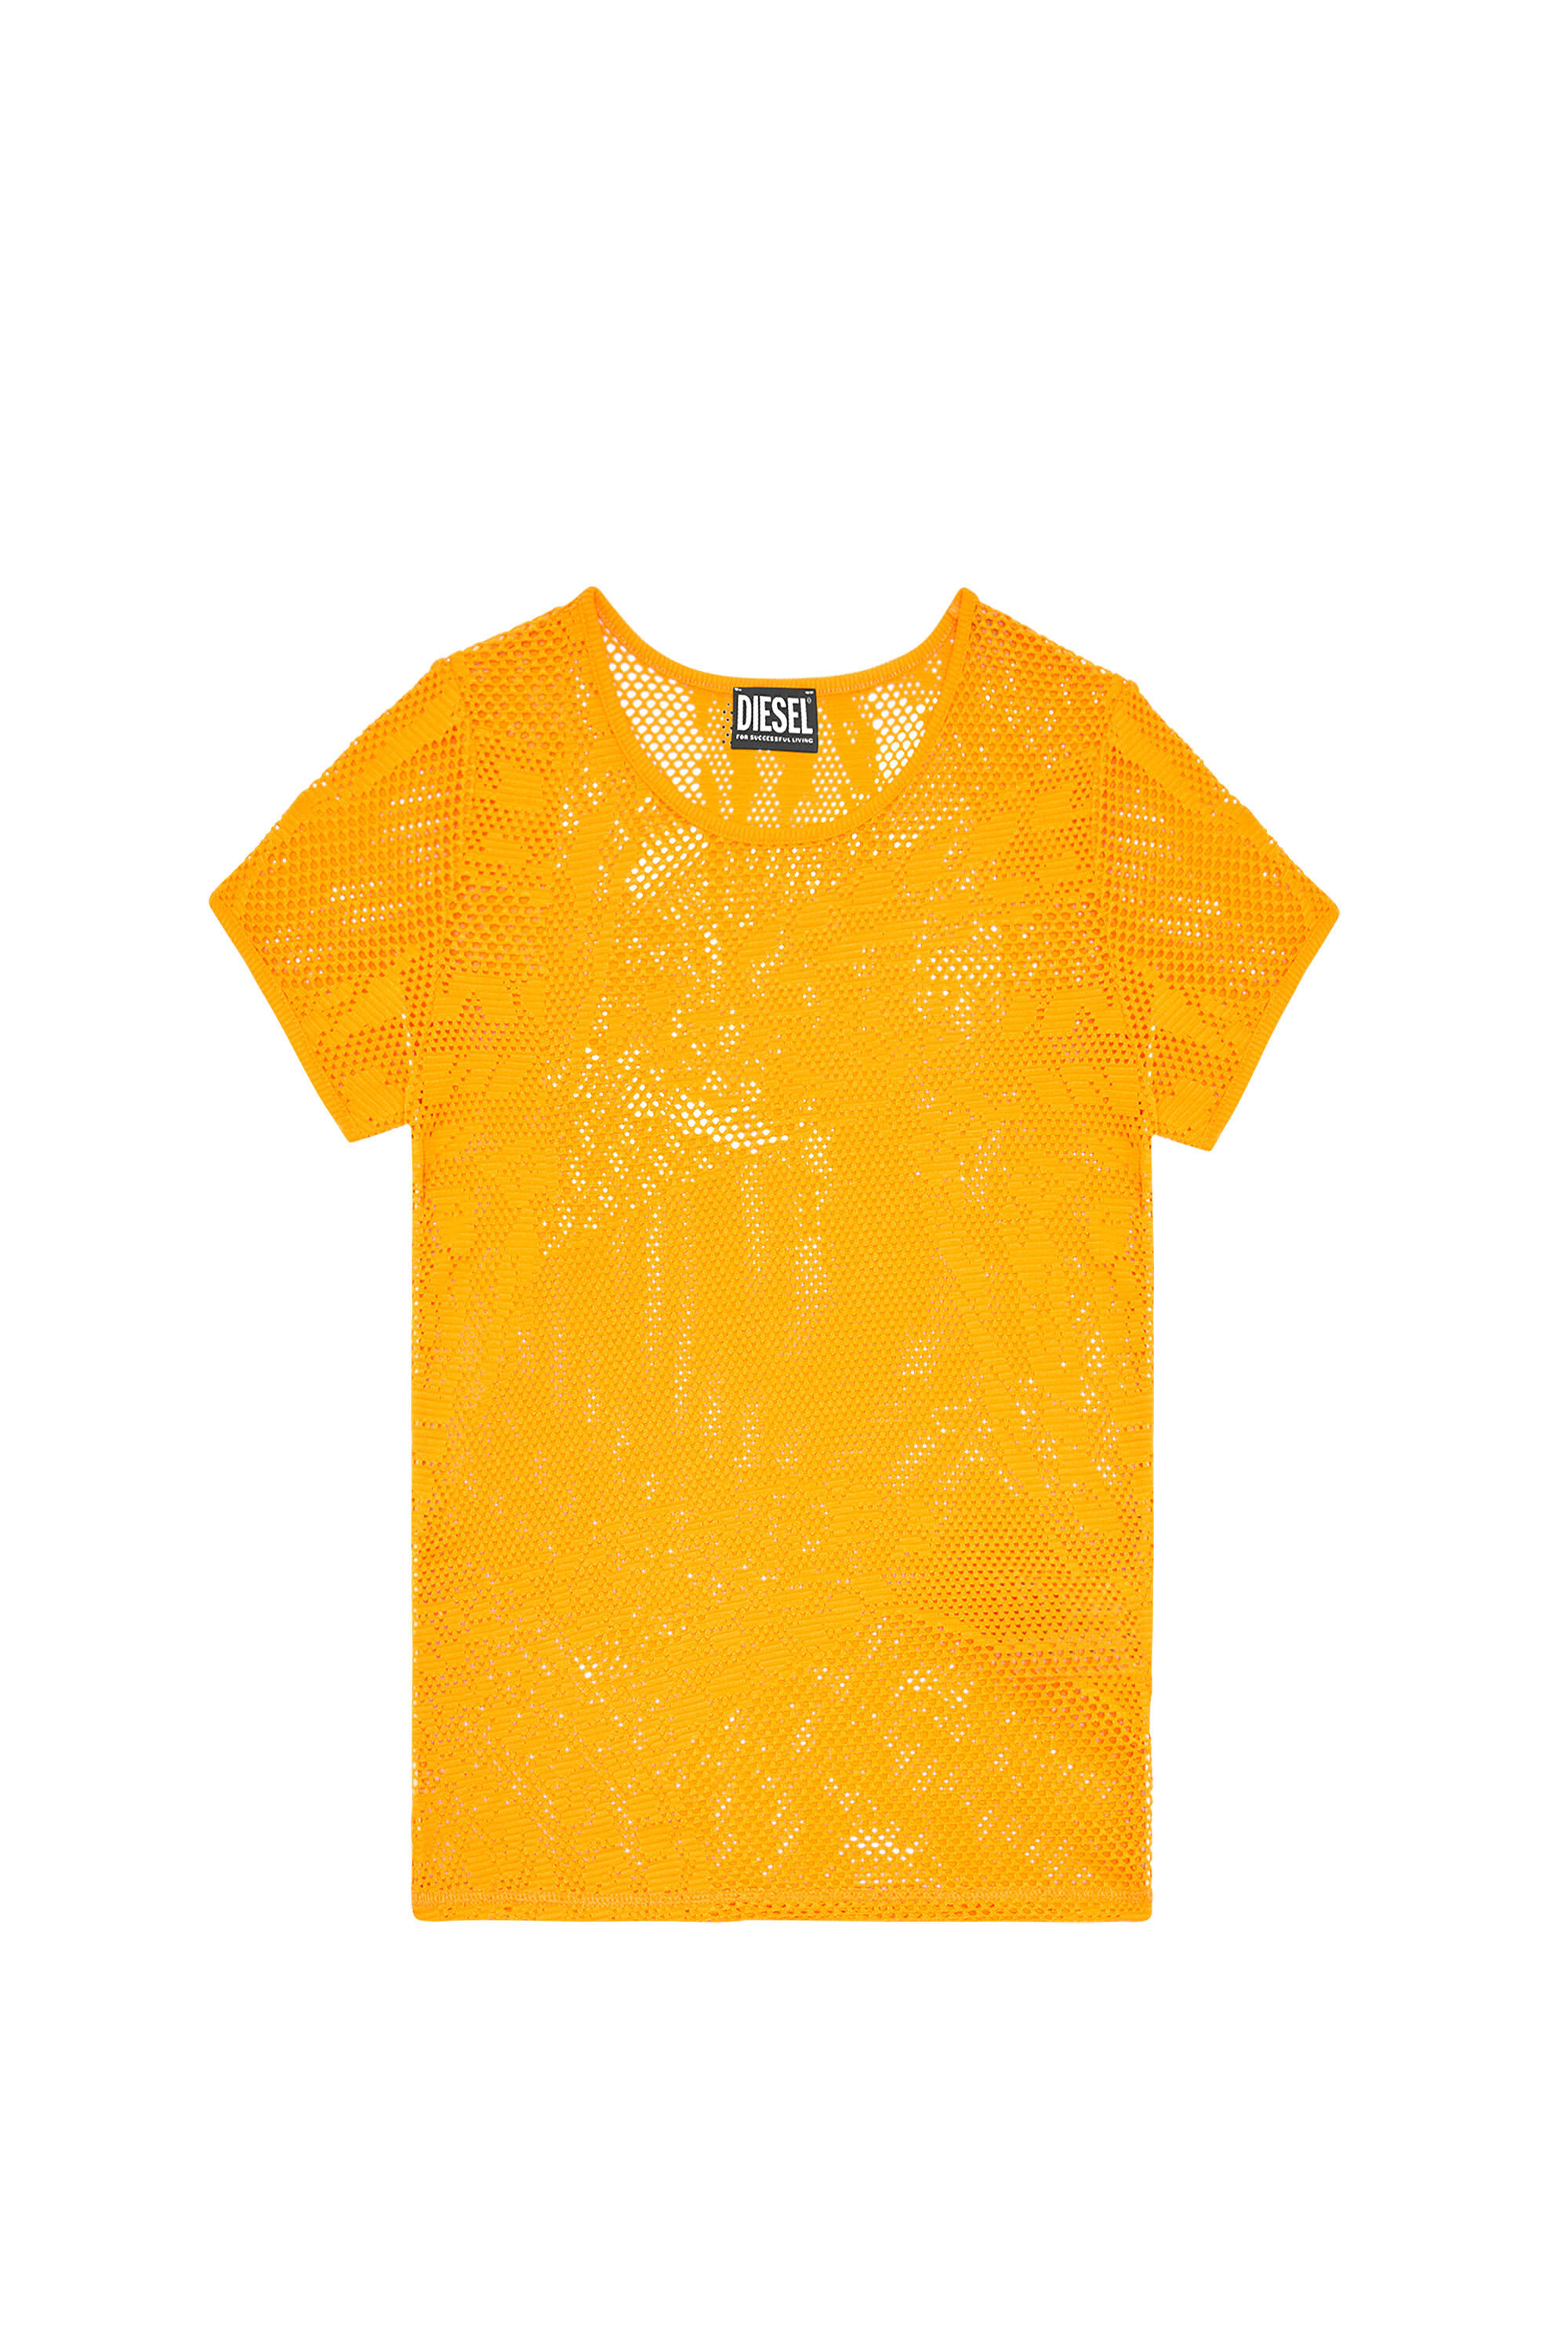 Diesel - T-JAQUE, Yellow - Image 2